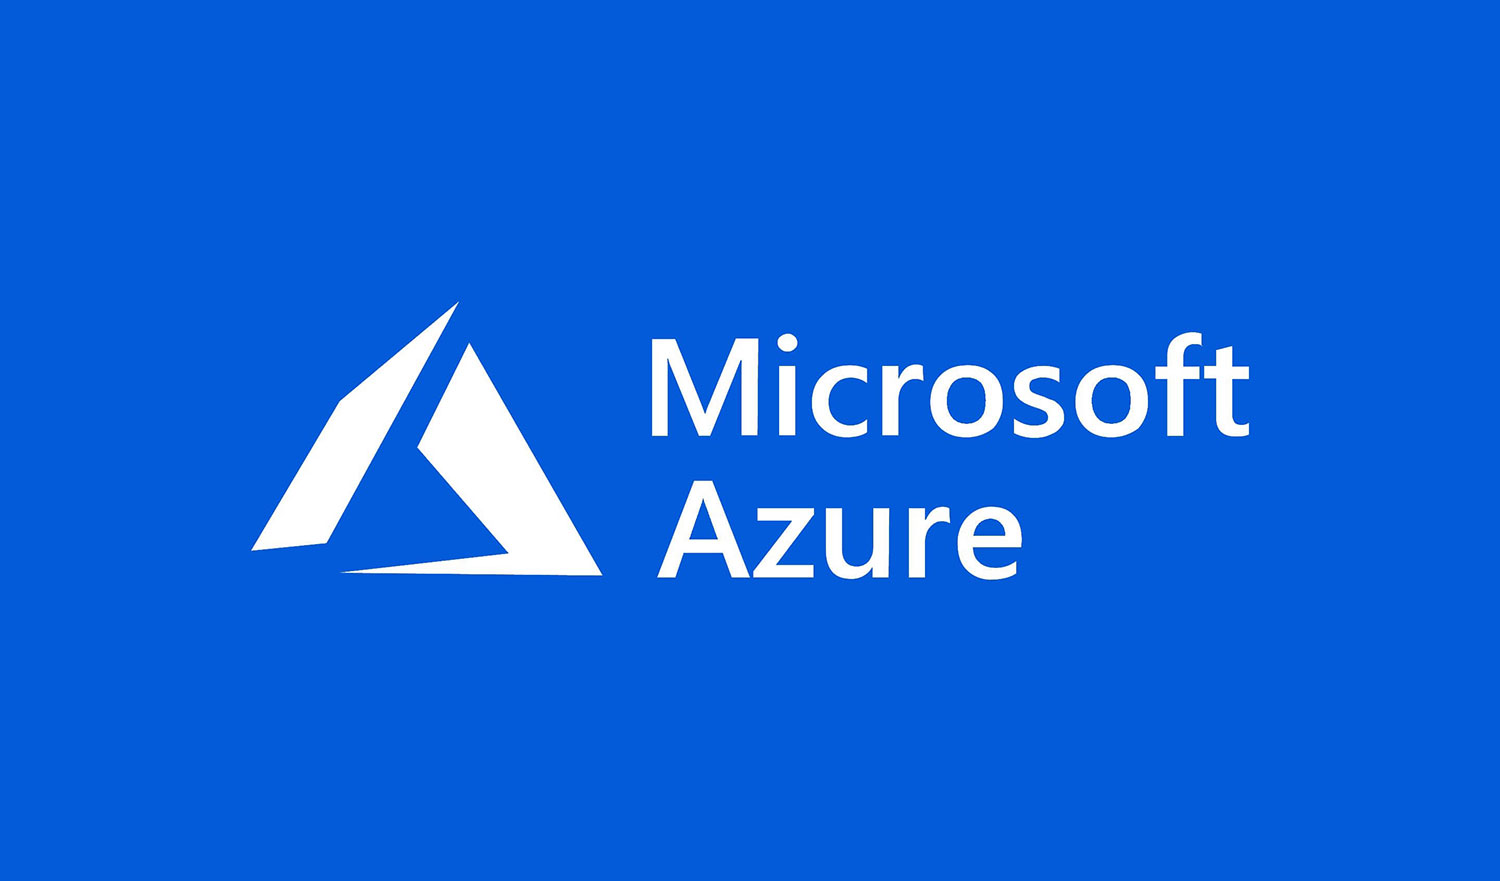 How to Enable or remove Two Way Authentication for Azure portal